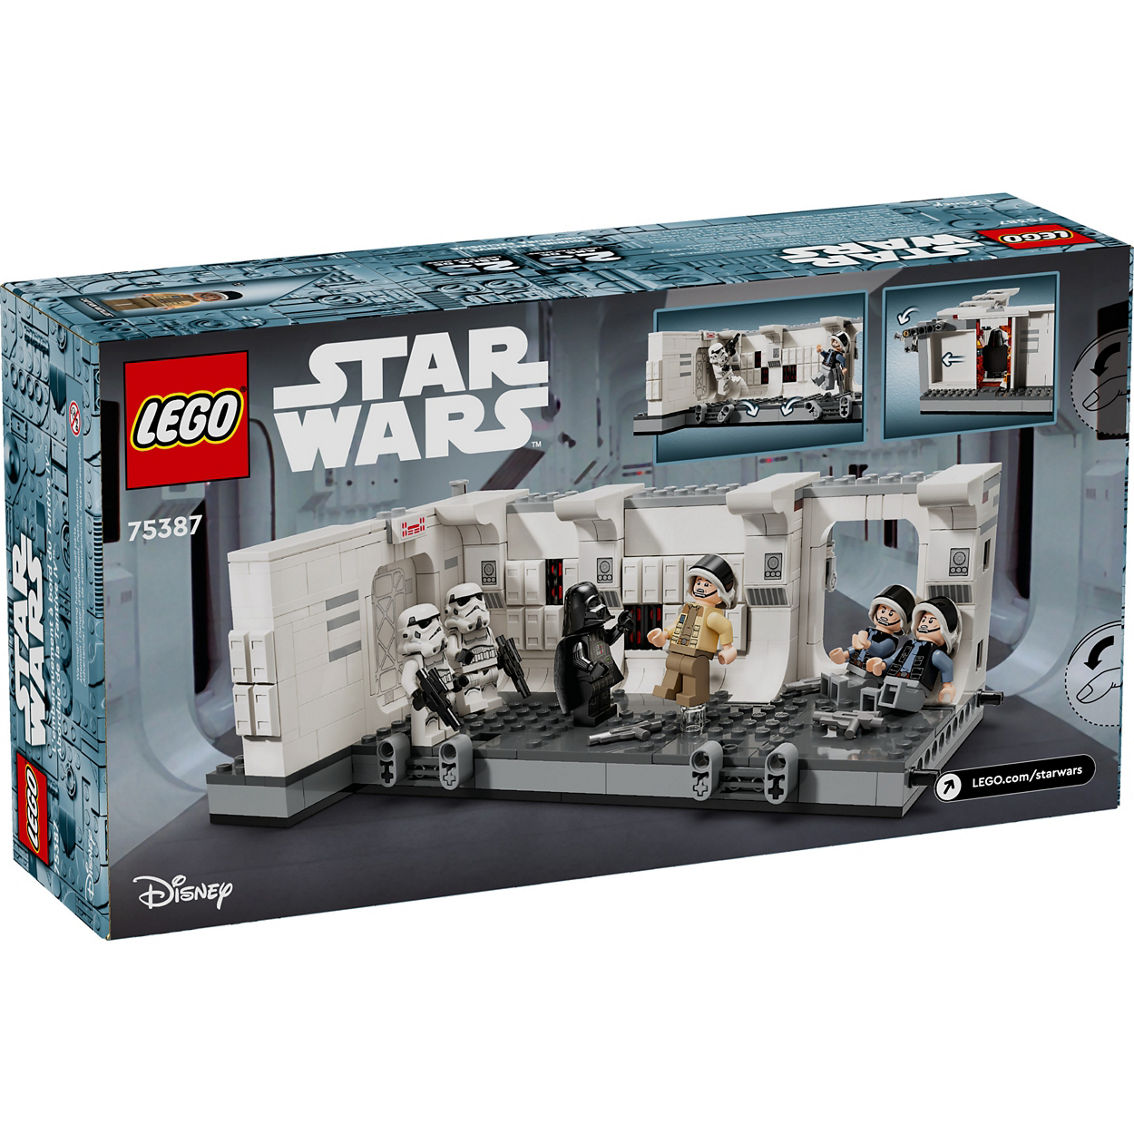 LEGO Star Wars Boarding the Tantive IV Playset 75387 - Image 2 of 10